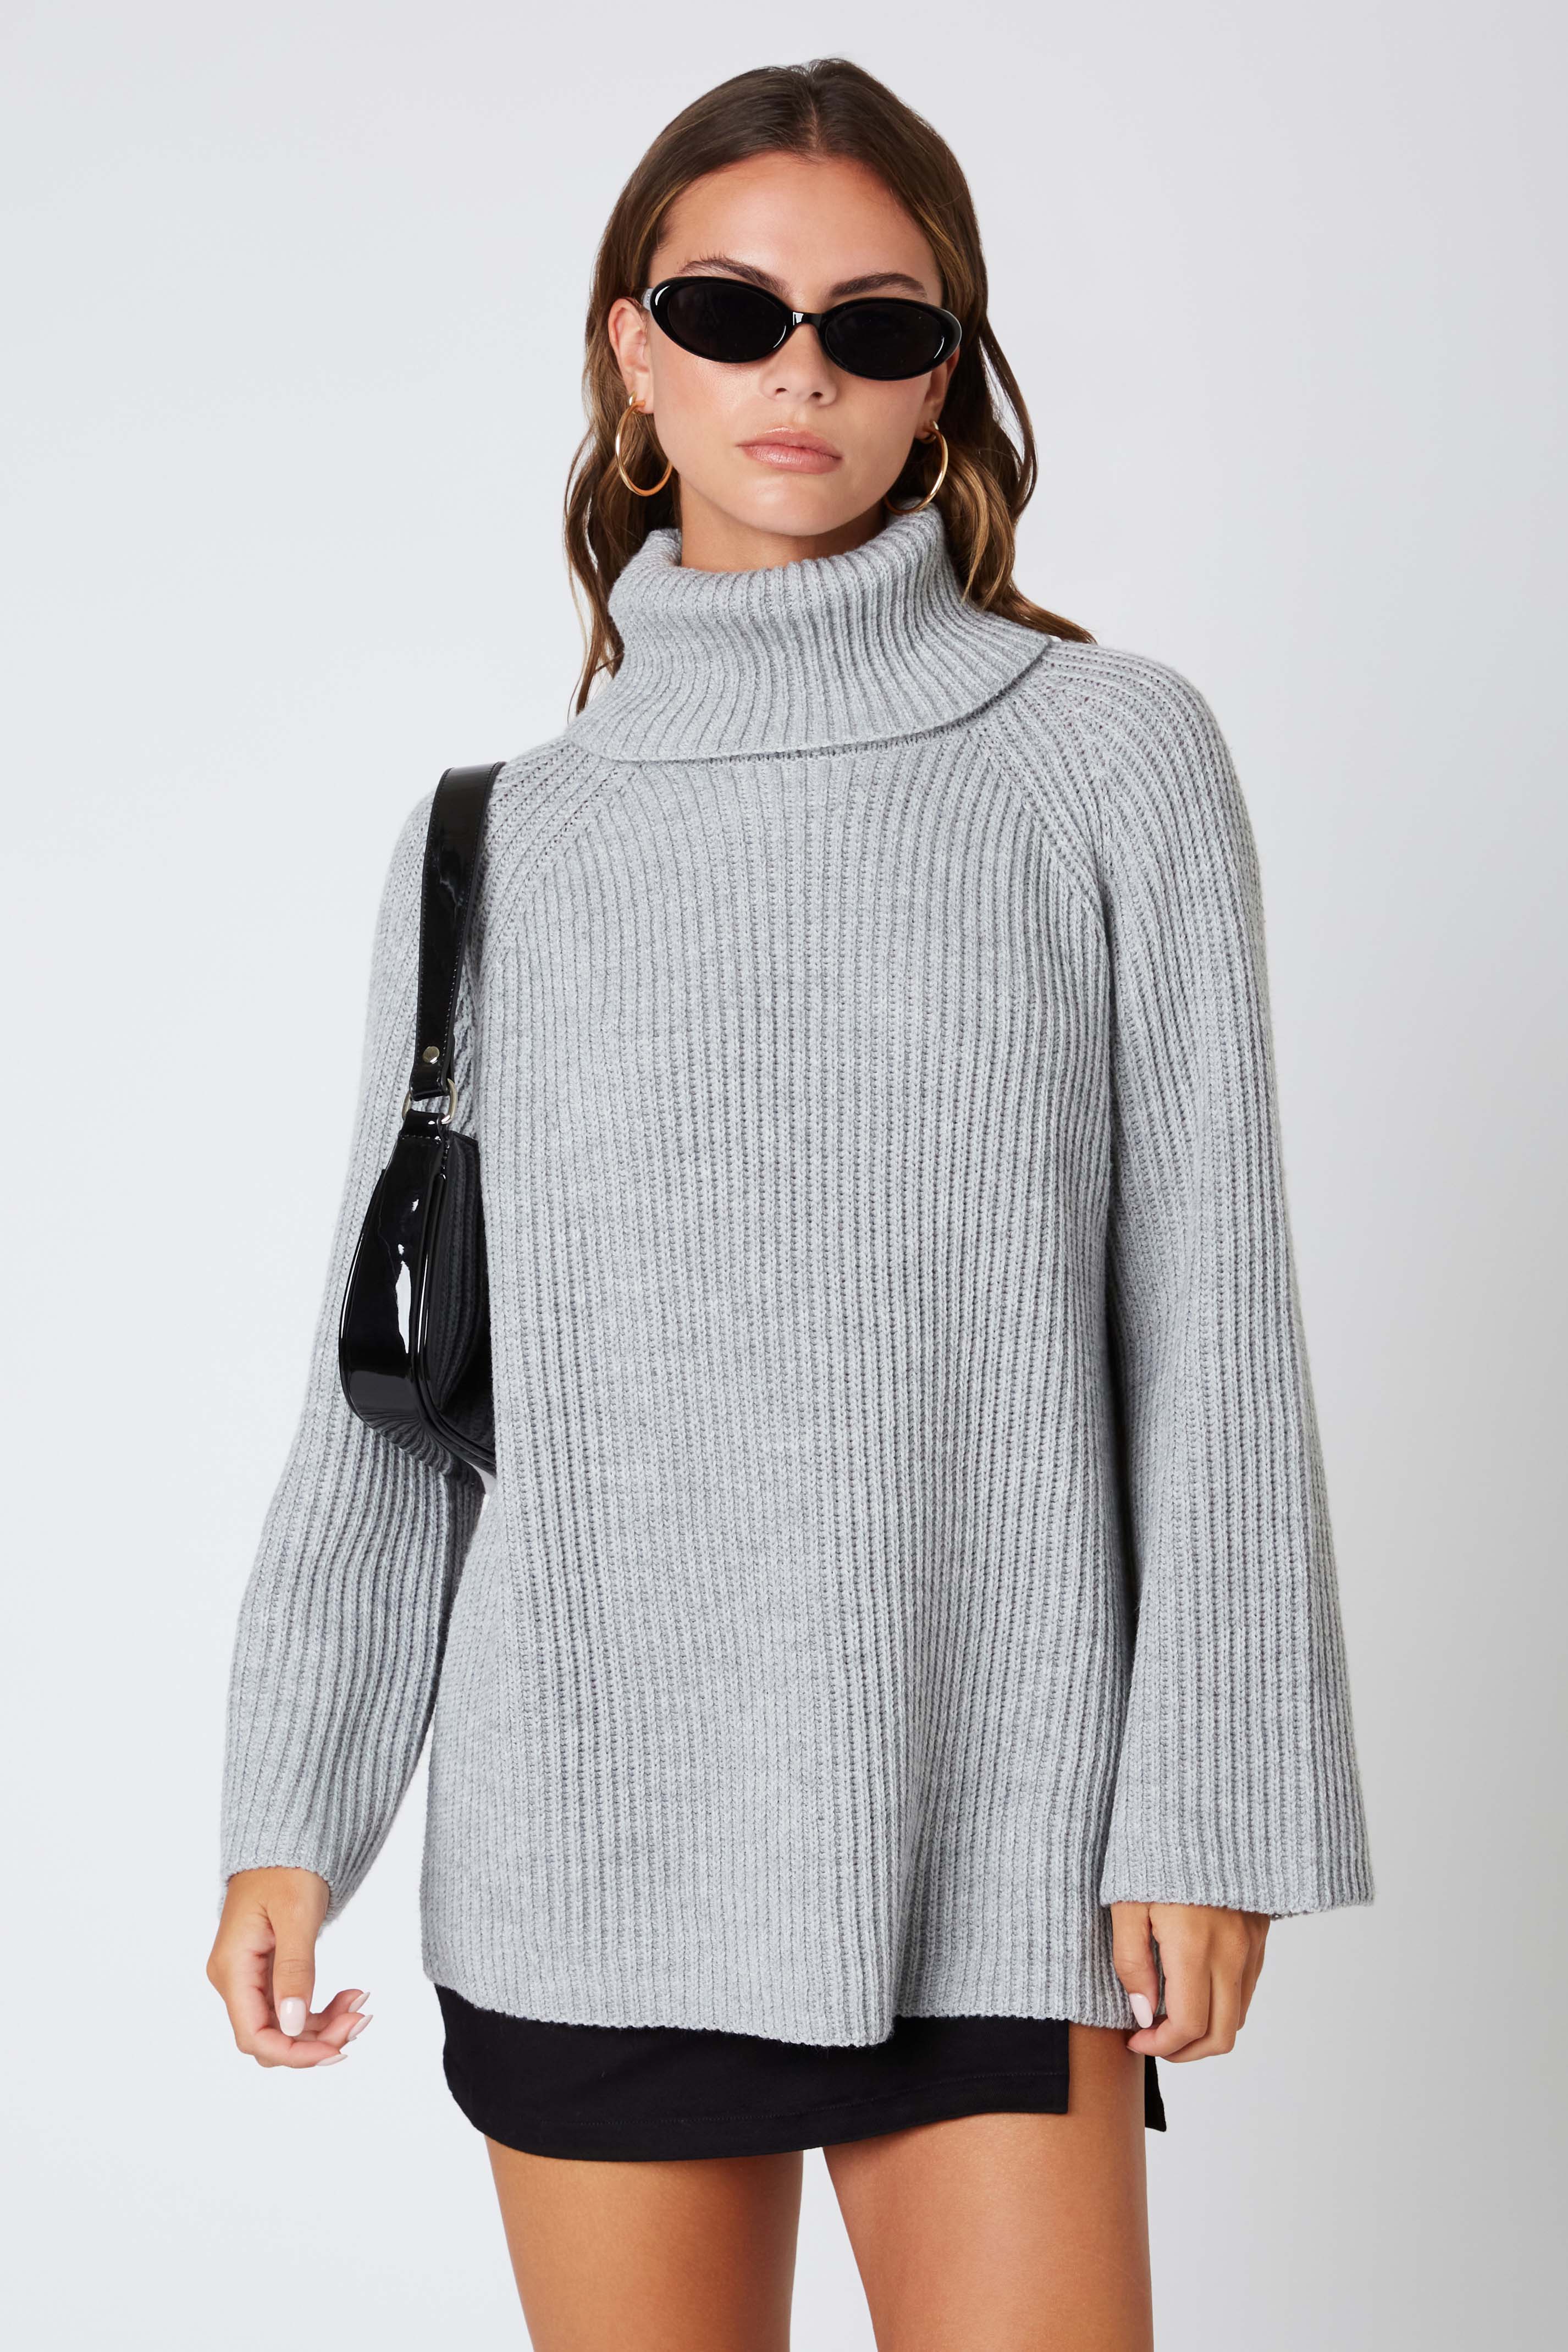 Oversized Turtleneck Sweater in Grey Front View